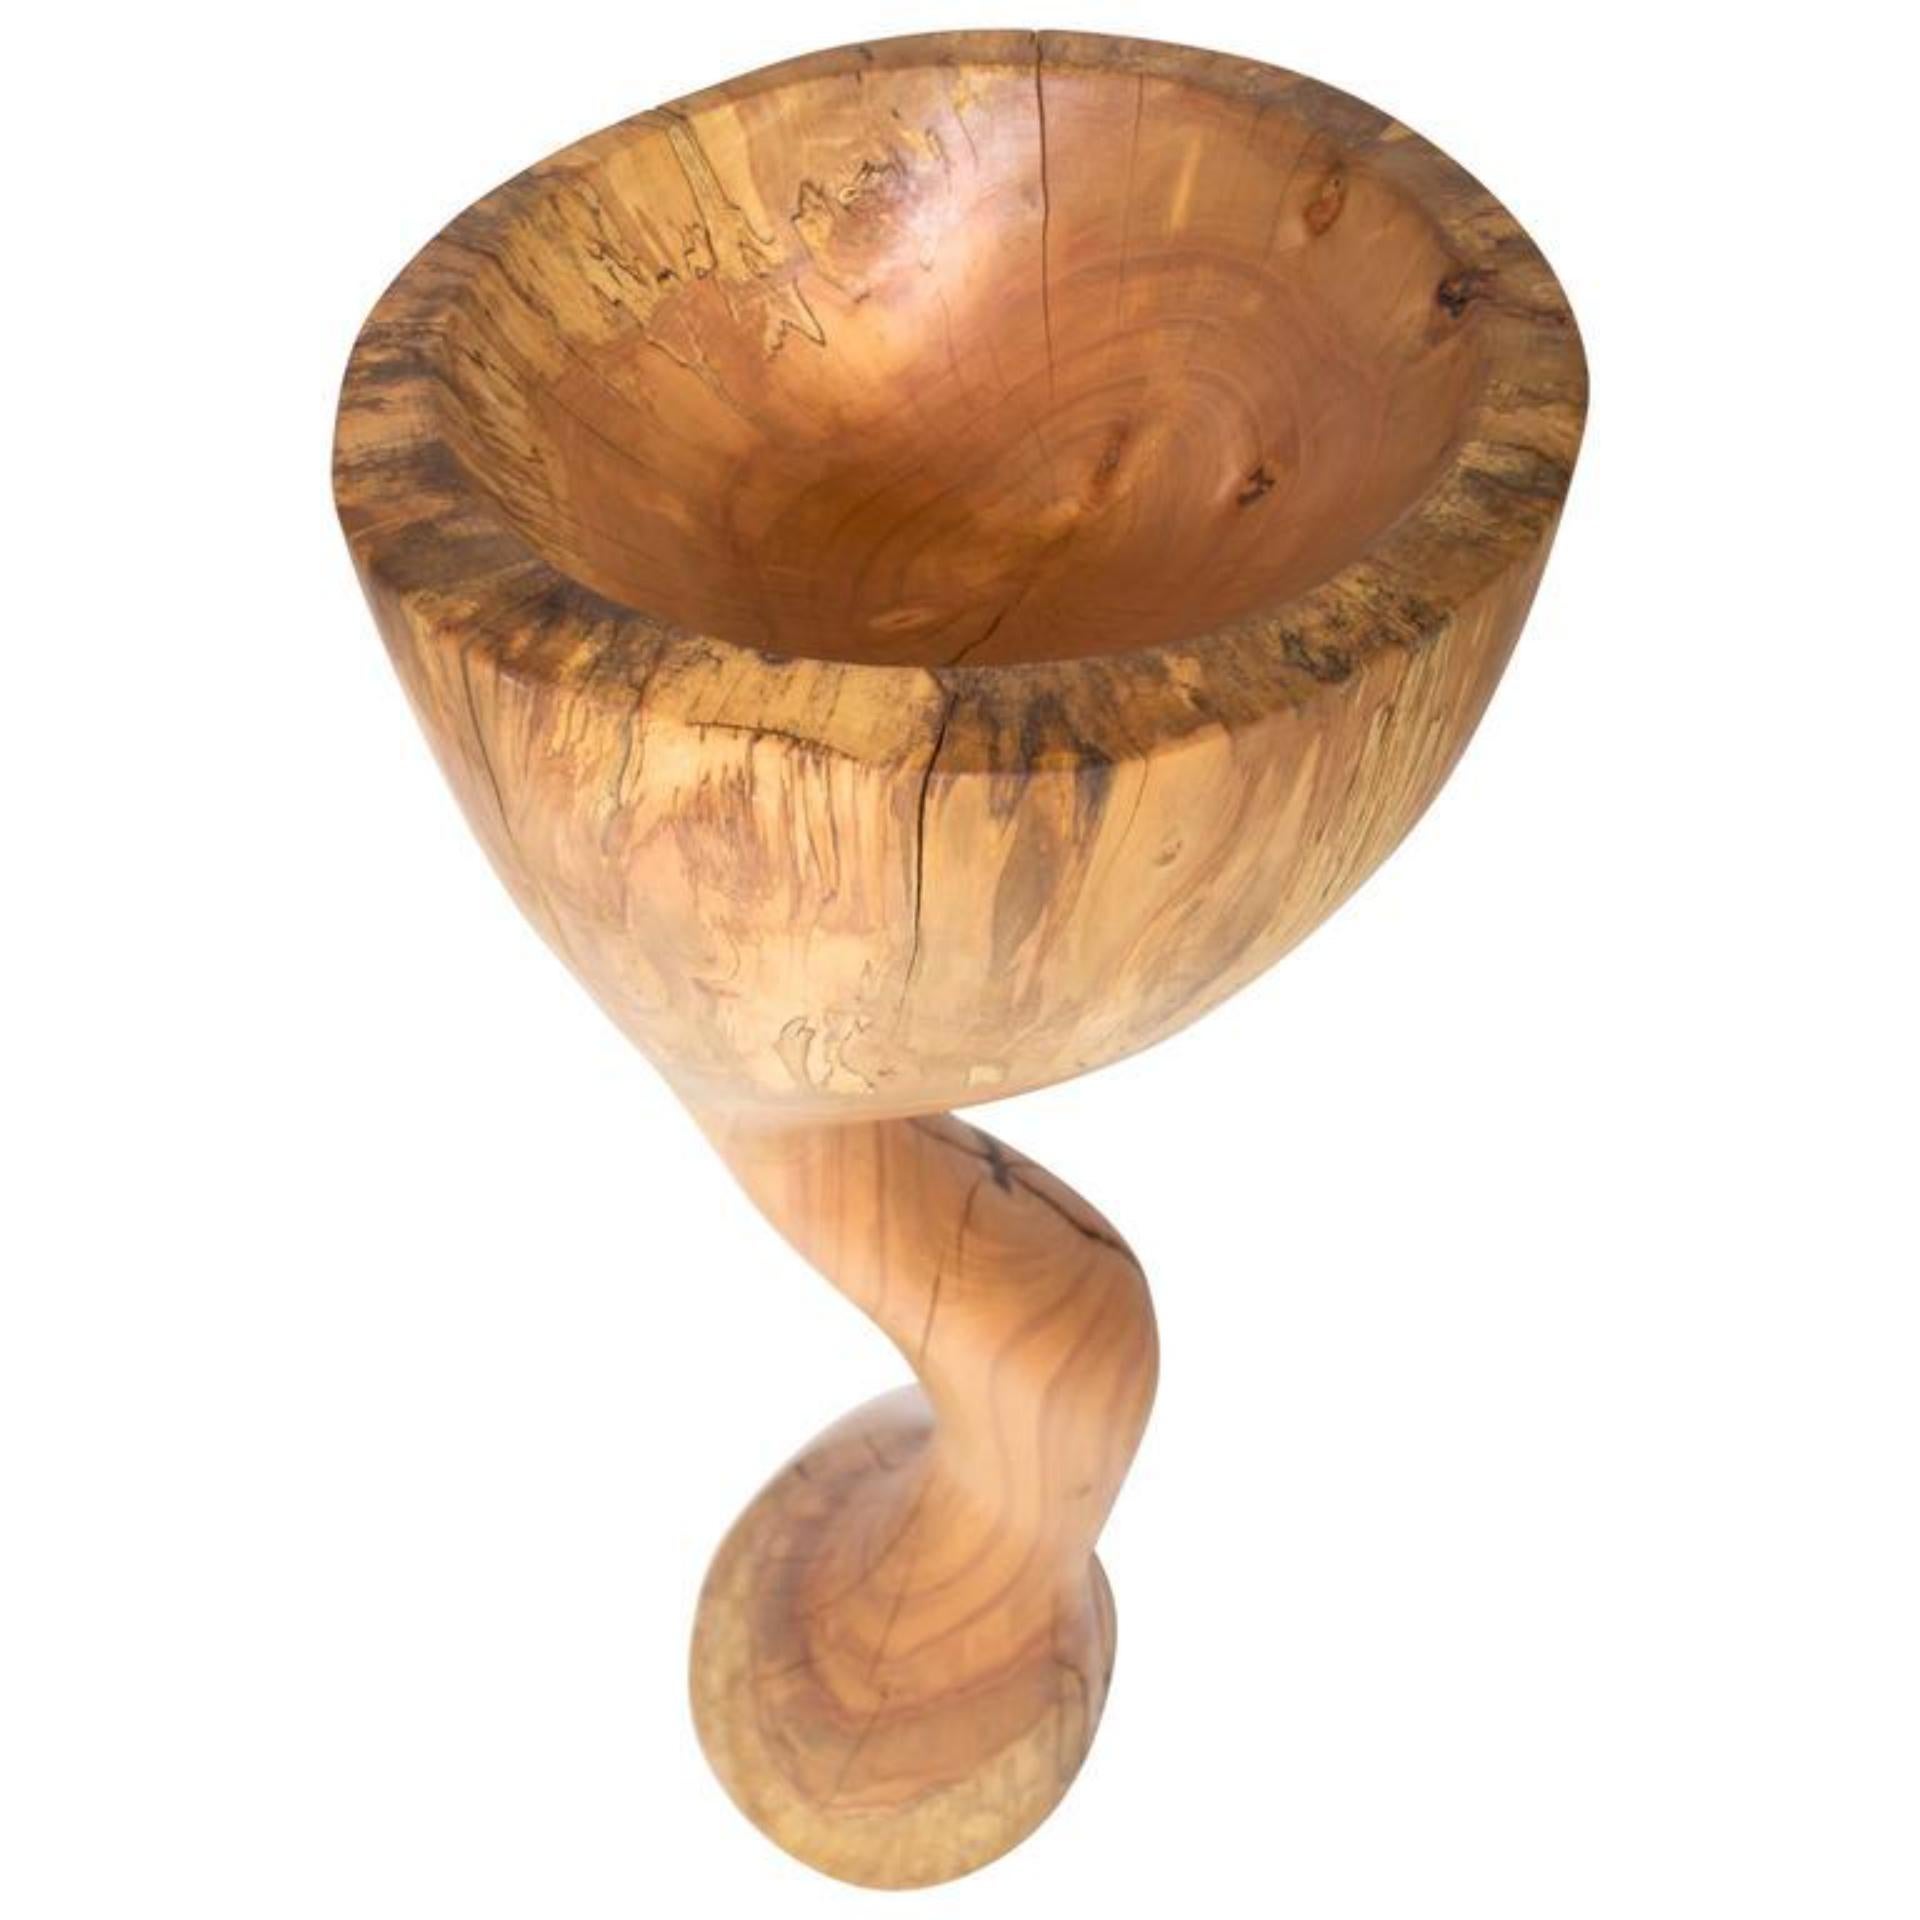 Unique signed bowl by Jörg Pietschmann
Vessel sculpture· Norway maple
Measures: H 143 x W 47 x D 46 cm
Carved from a strongly curved main branch of an old maple tree.
Polished oil finish.

In Pietschmann’s sculptures, trees that for centuries were